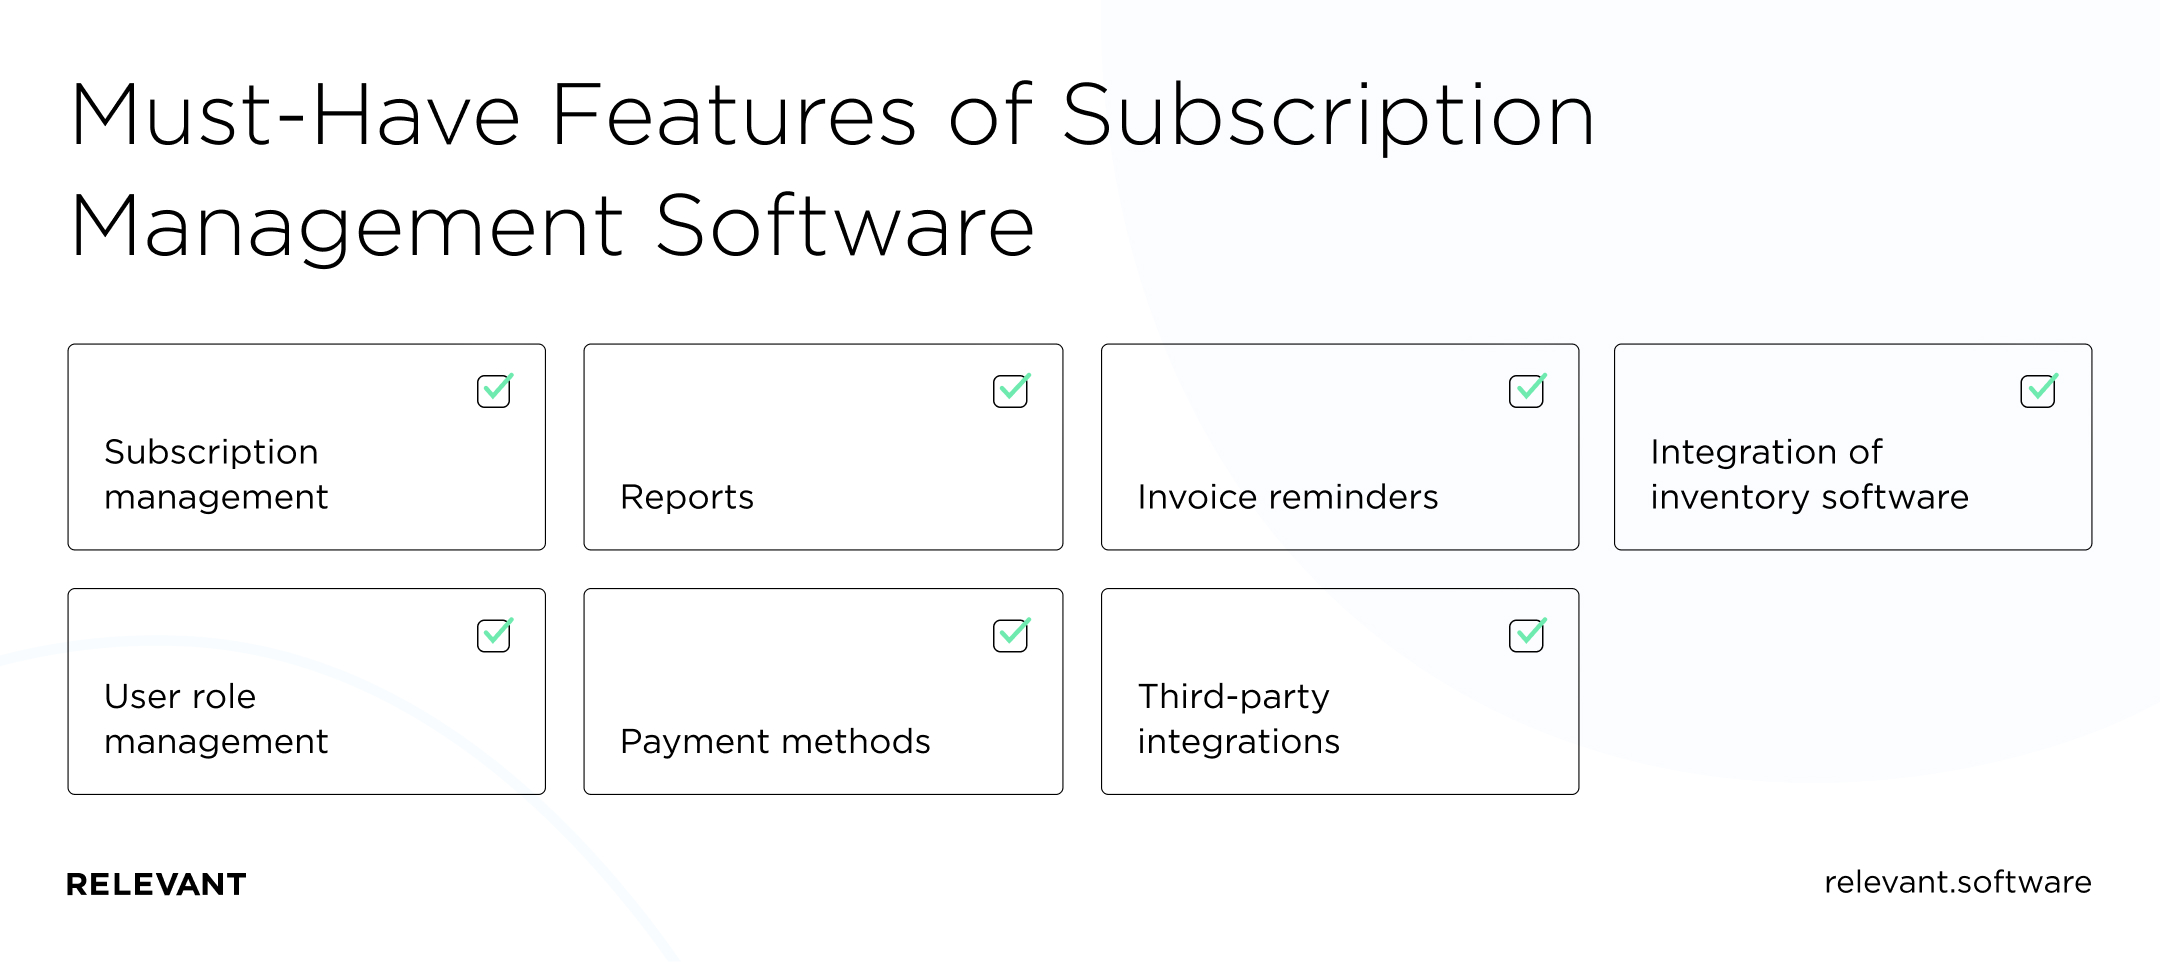 Must-have features of subscription management software